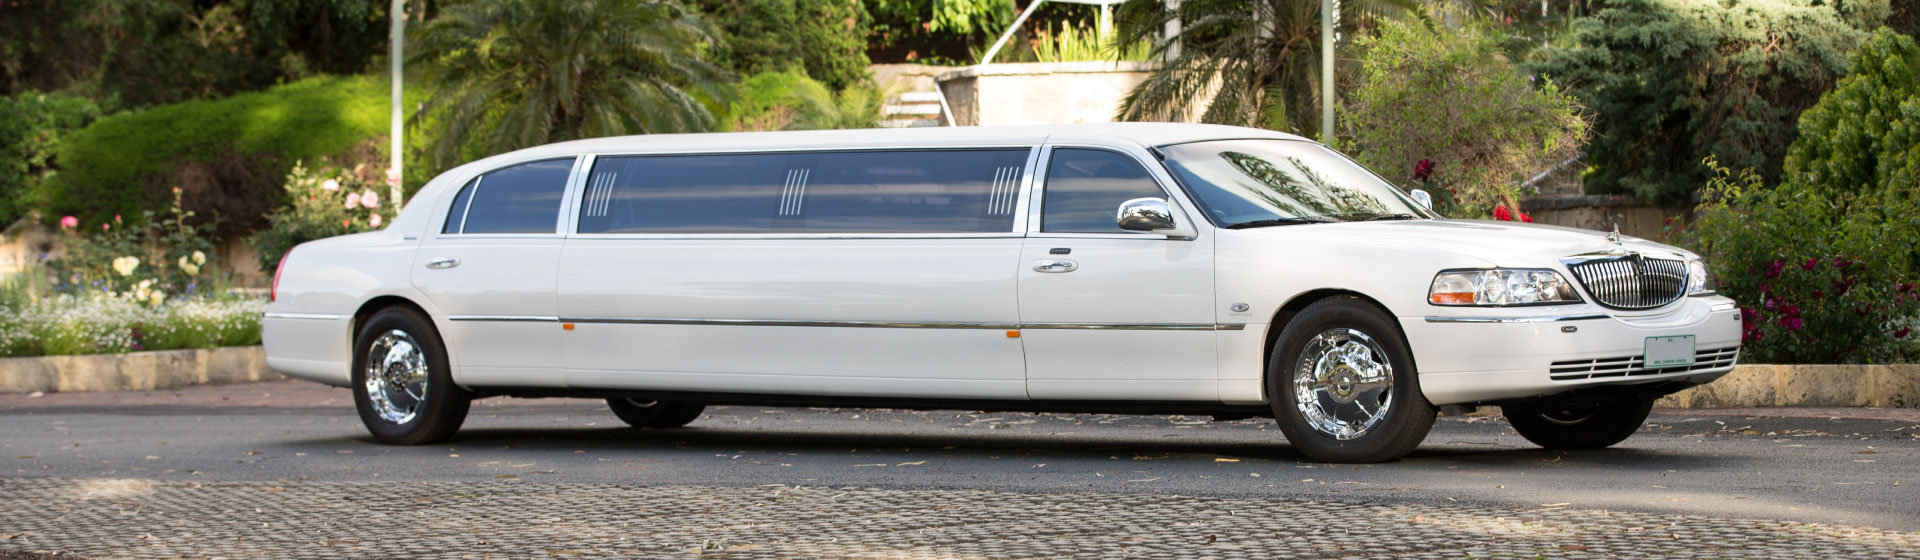 Lincoln-Limo for Airport Services